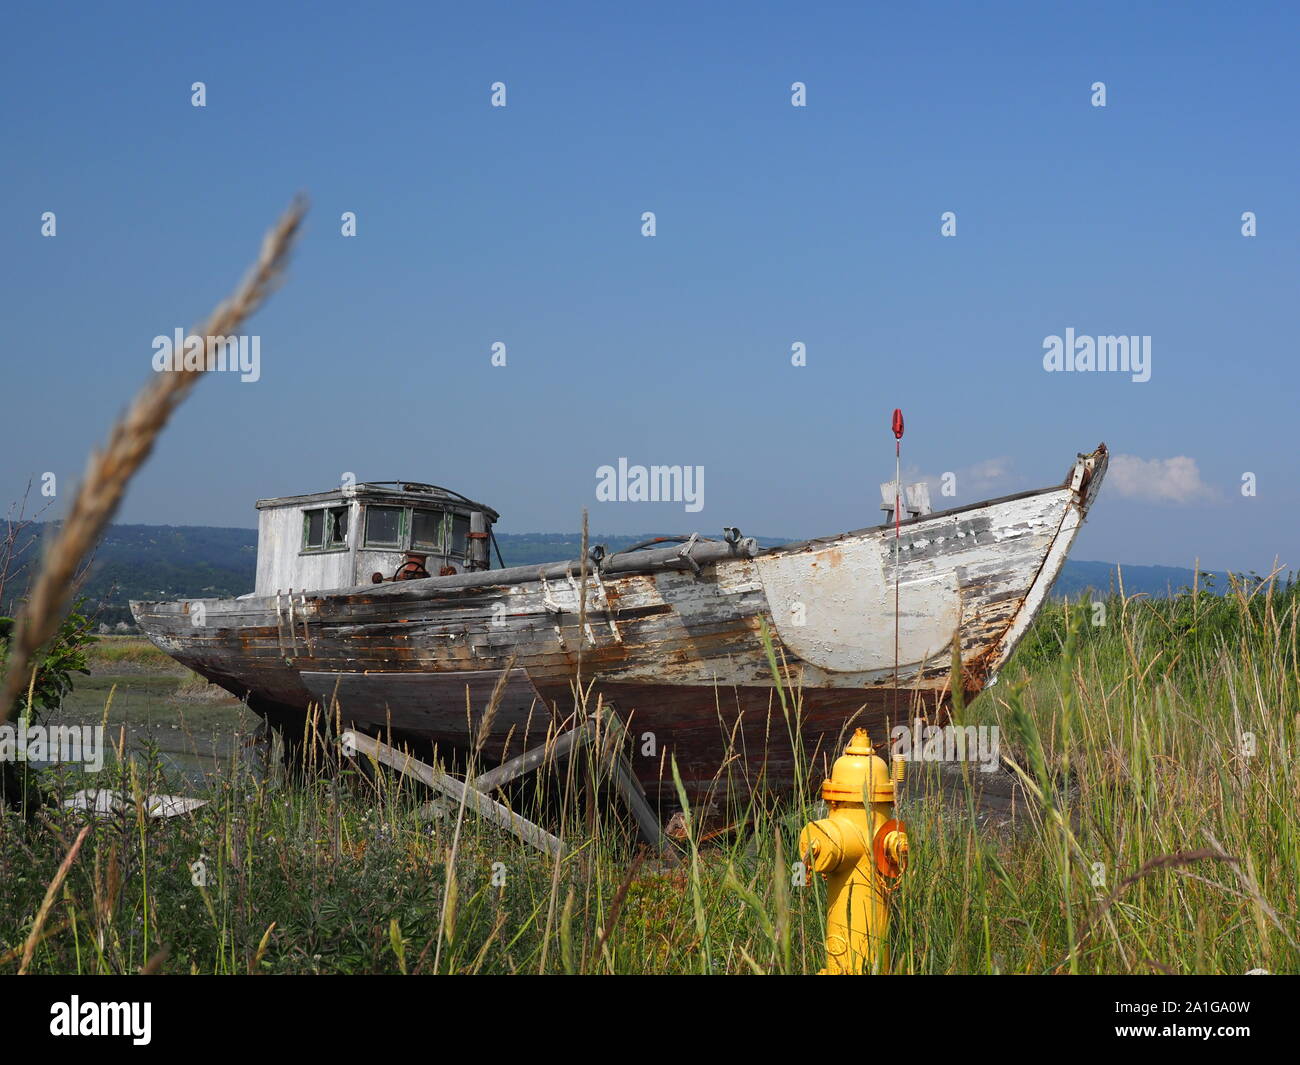 Beached Abandoned derelict wrecked Boat Homer Alaska America Stock Photo